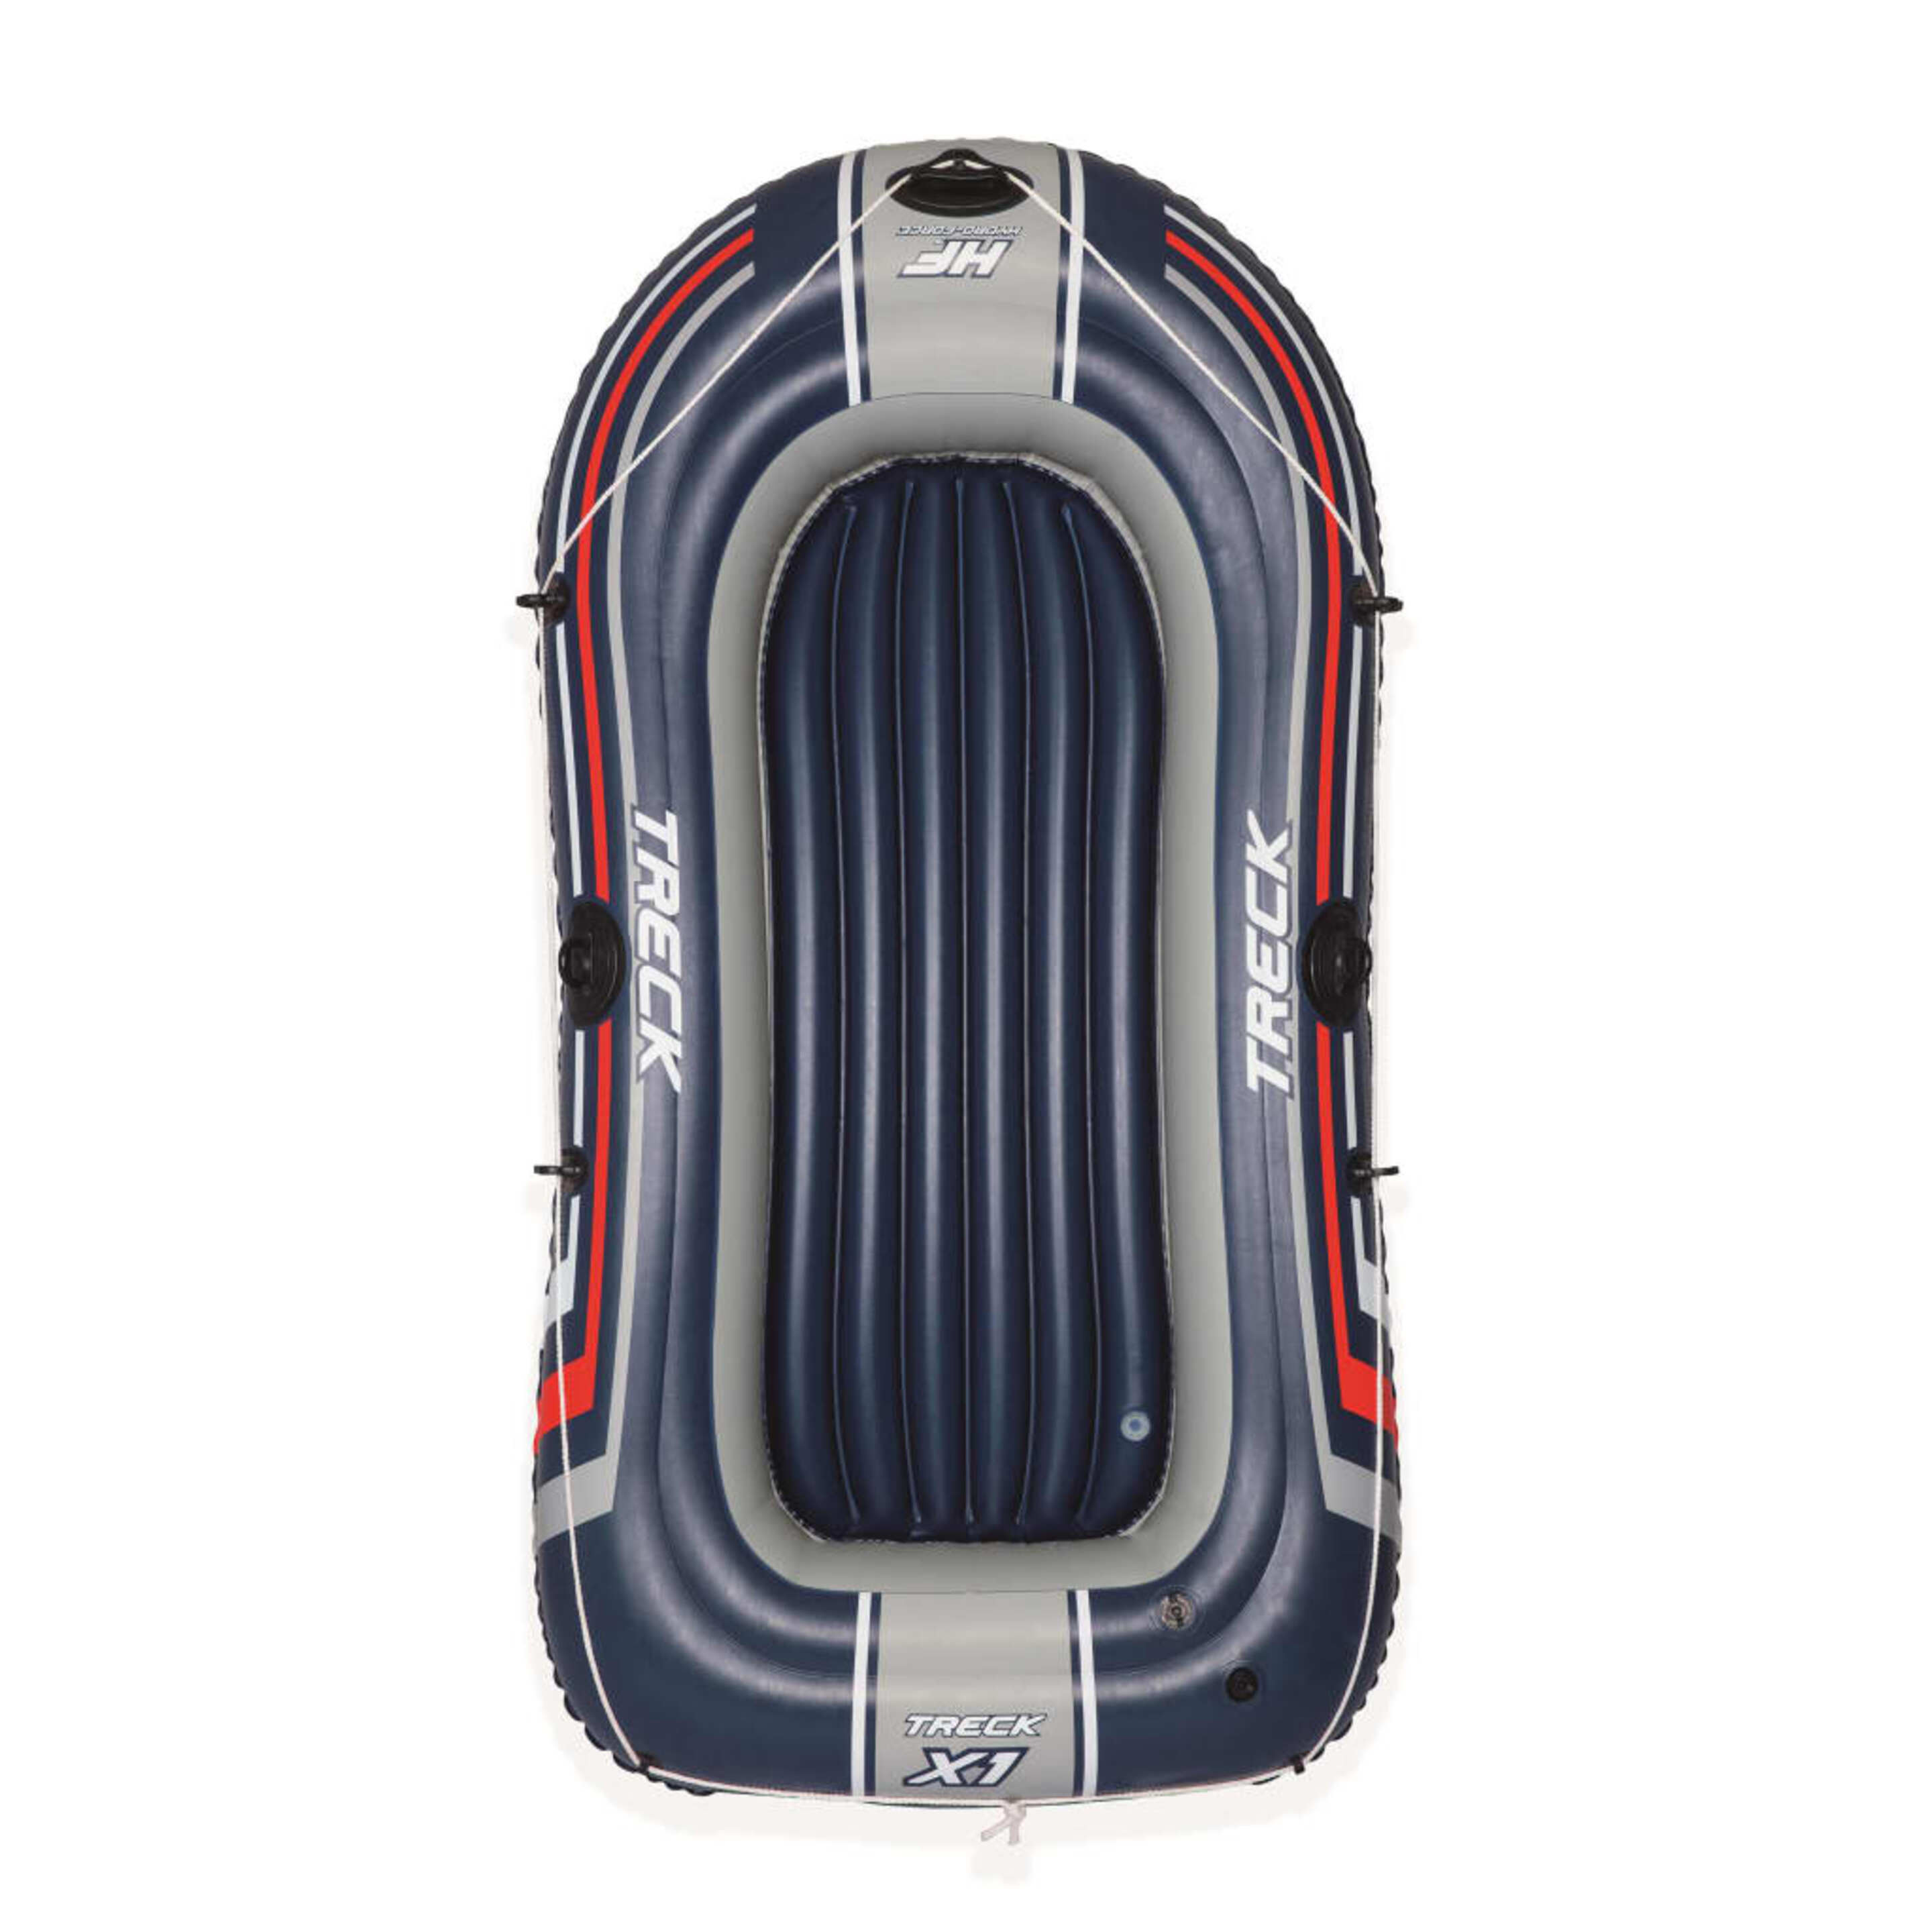 Bestway Barca Inflable Hydro-force Treck X1 228x121 Cm 61064